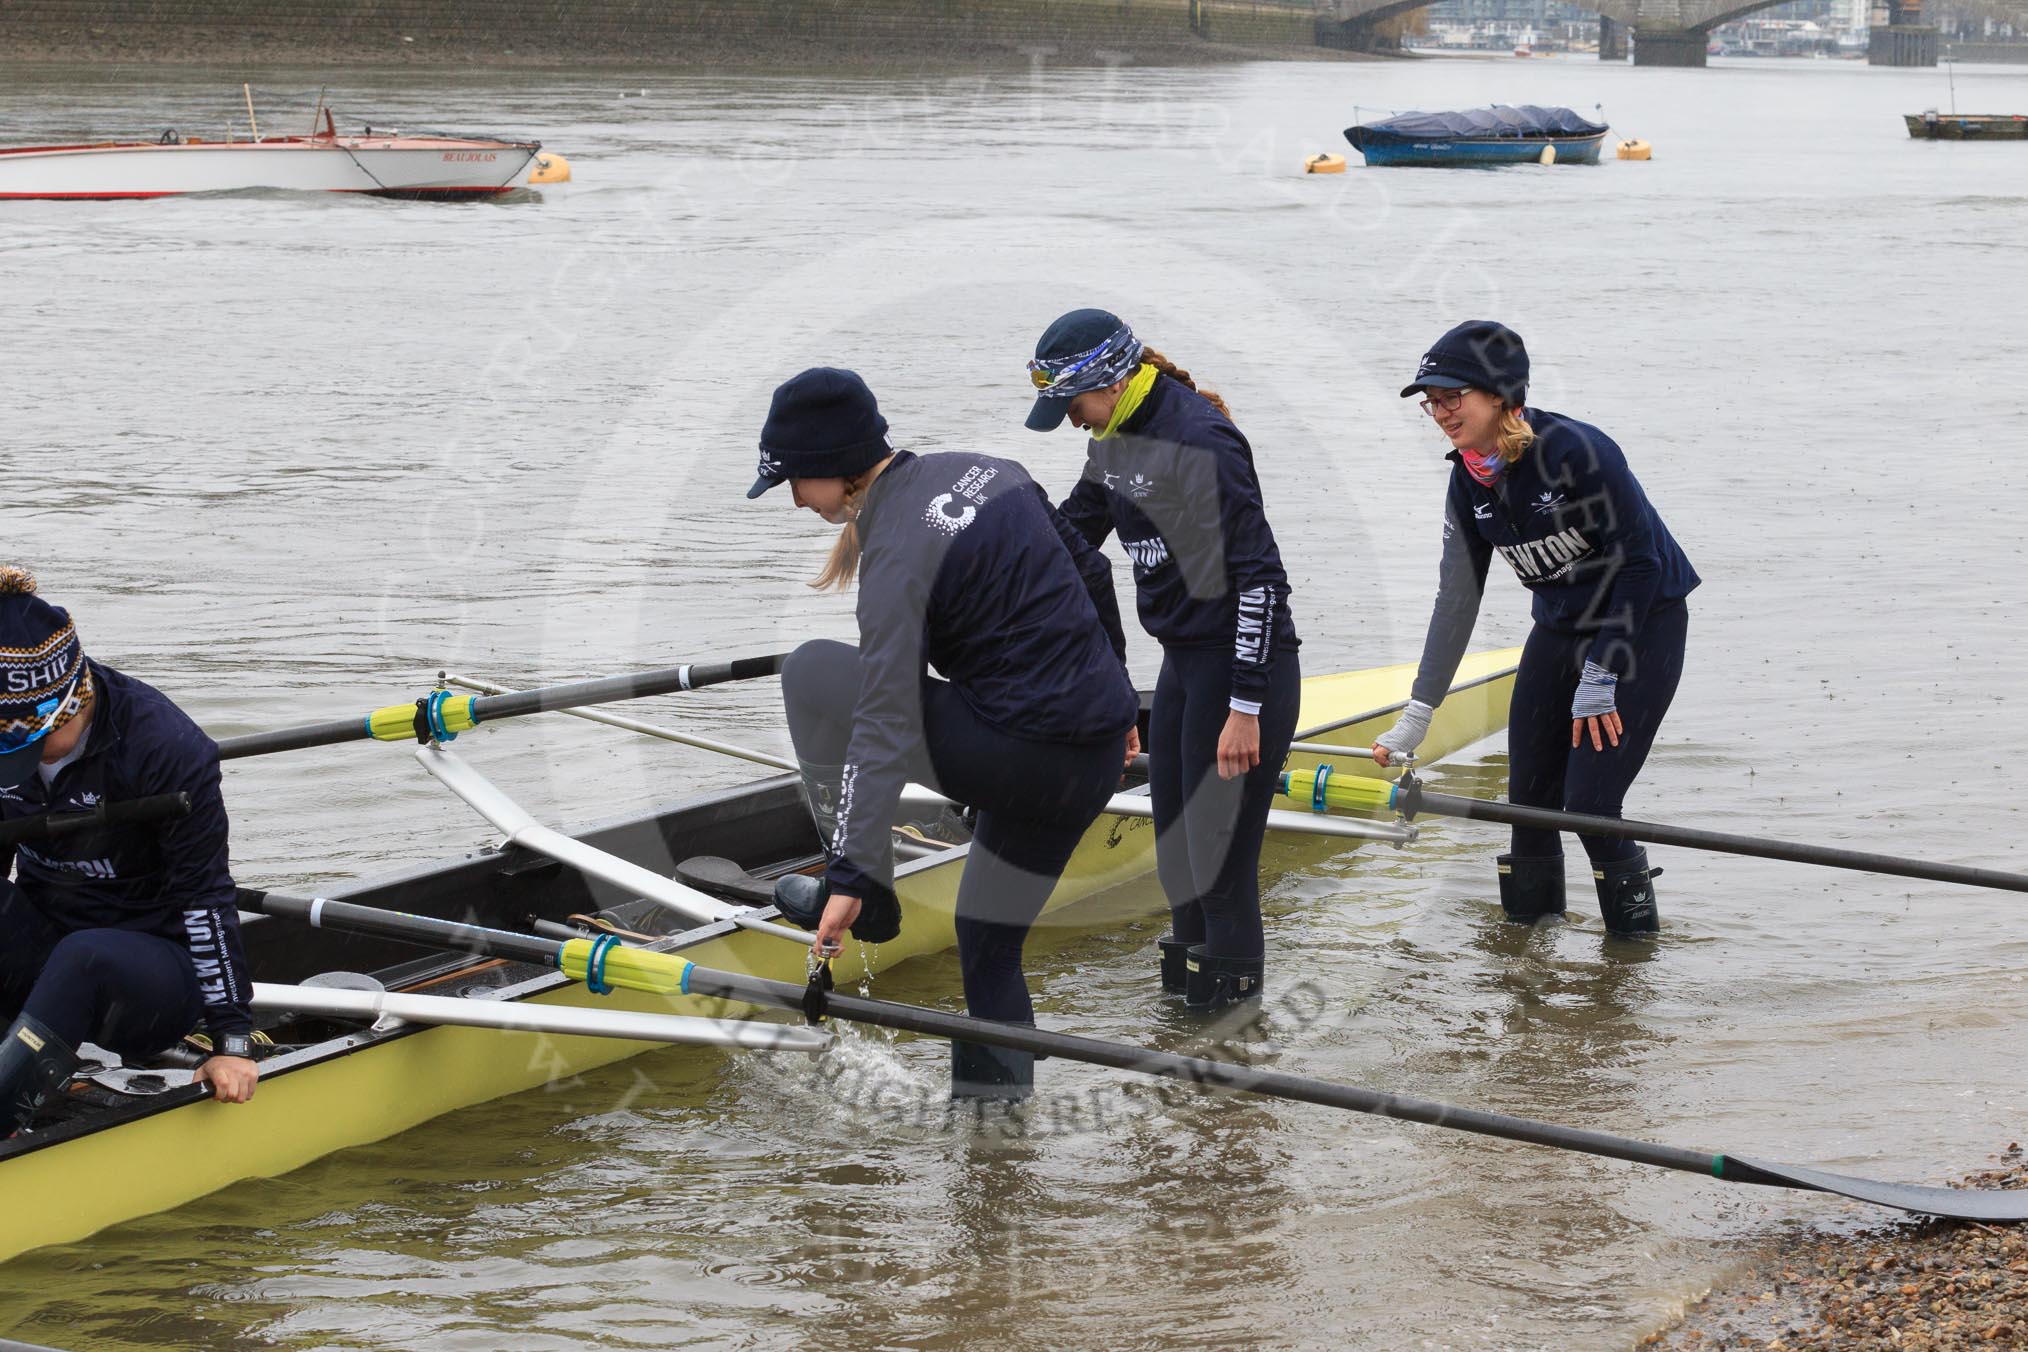 The Women's Boat Race season 2018 - fixture OUWBC vs. Molesey BC: OUWBC getting the boat ready on a cold and rainy day, here 4 seat Alice Roberts, 3 Juliette Perry, 2 Katherine Erickson, bow Renée Koolschijn.
River Thames between Putney Bridge and Mortlake,
London SW15,

United Kingdom,
on 04 March 2018 at 13:04, image #1